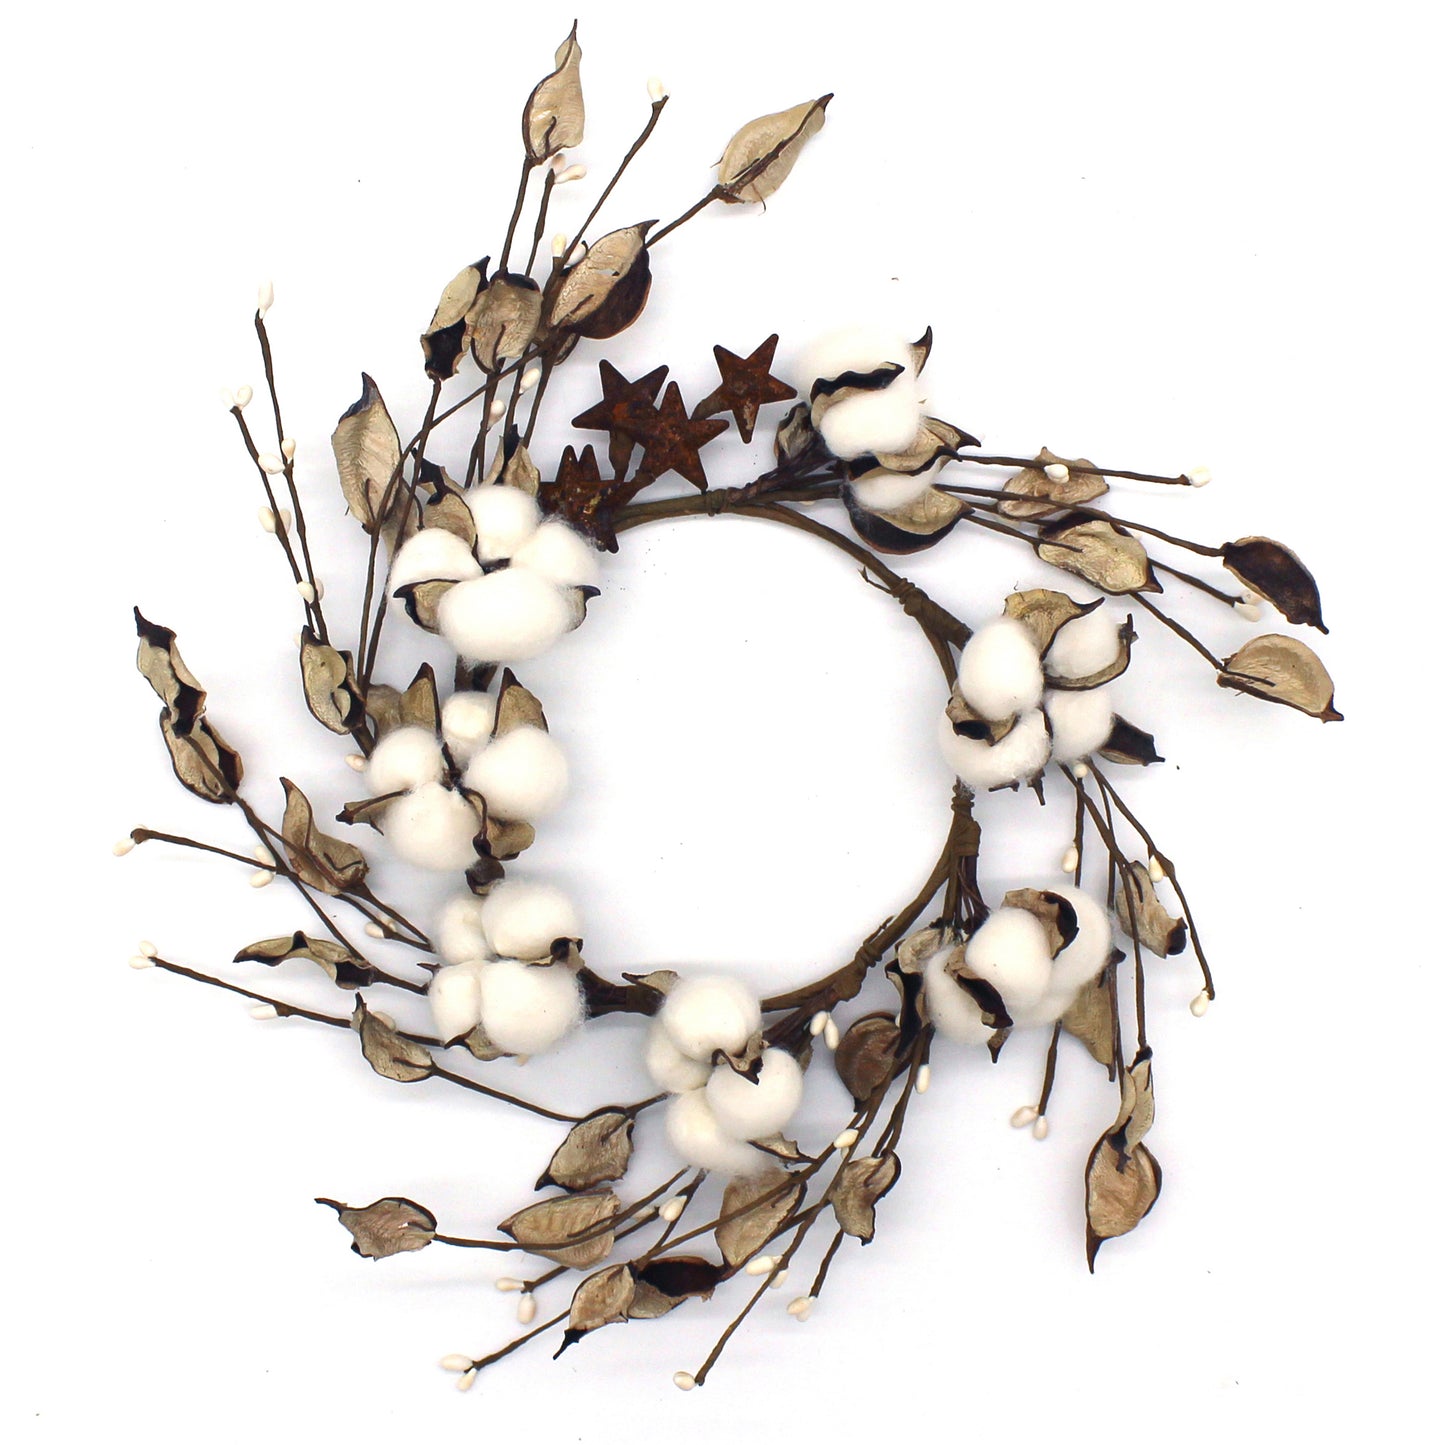 CVHOMEDECO. Primitives Rustic Cotton Pod Pip Berries and Autumn Leaves with Rusty Barn Stars Wreath, 14 Inch